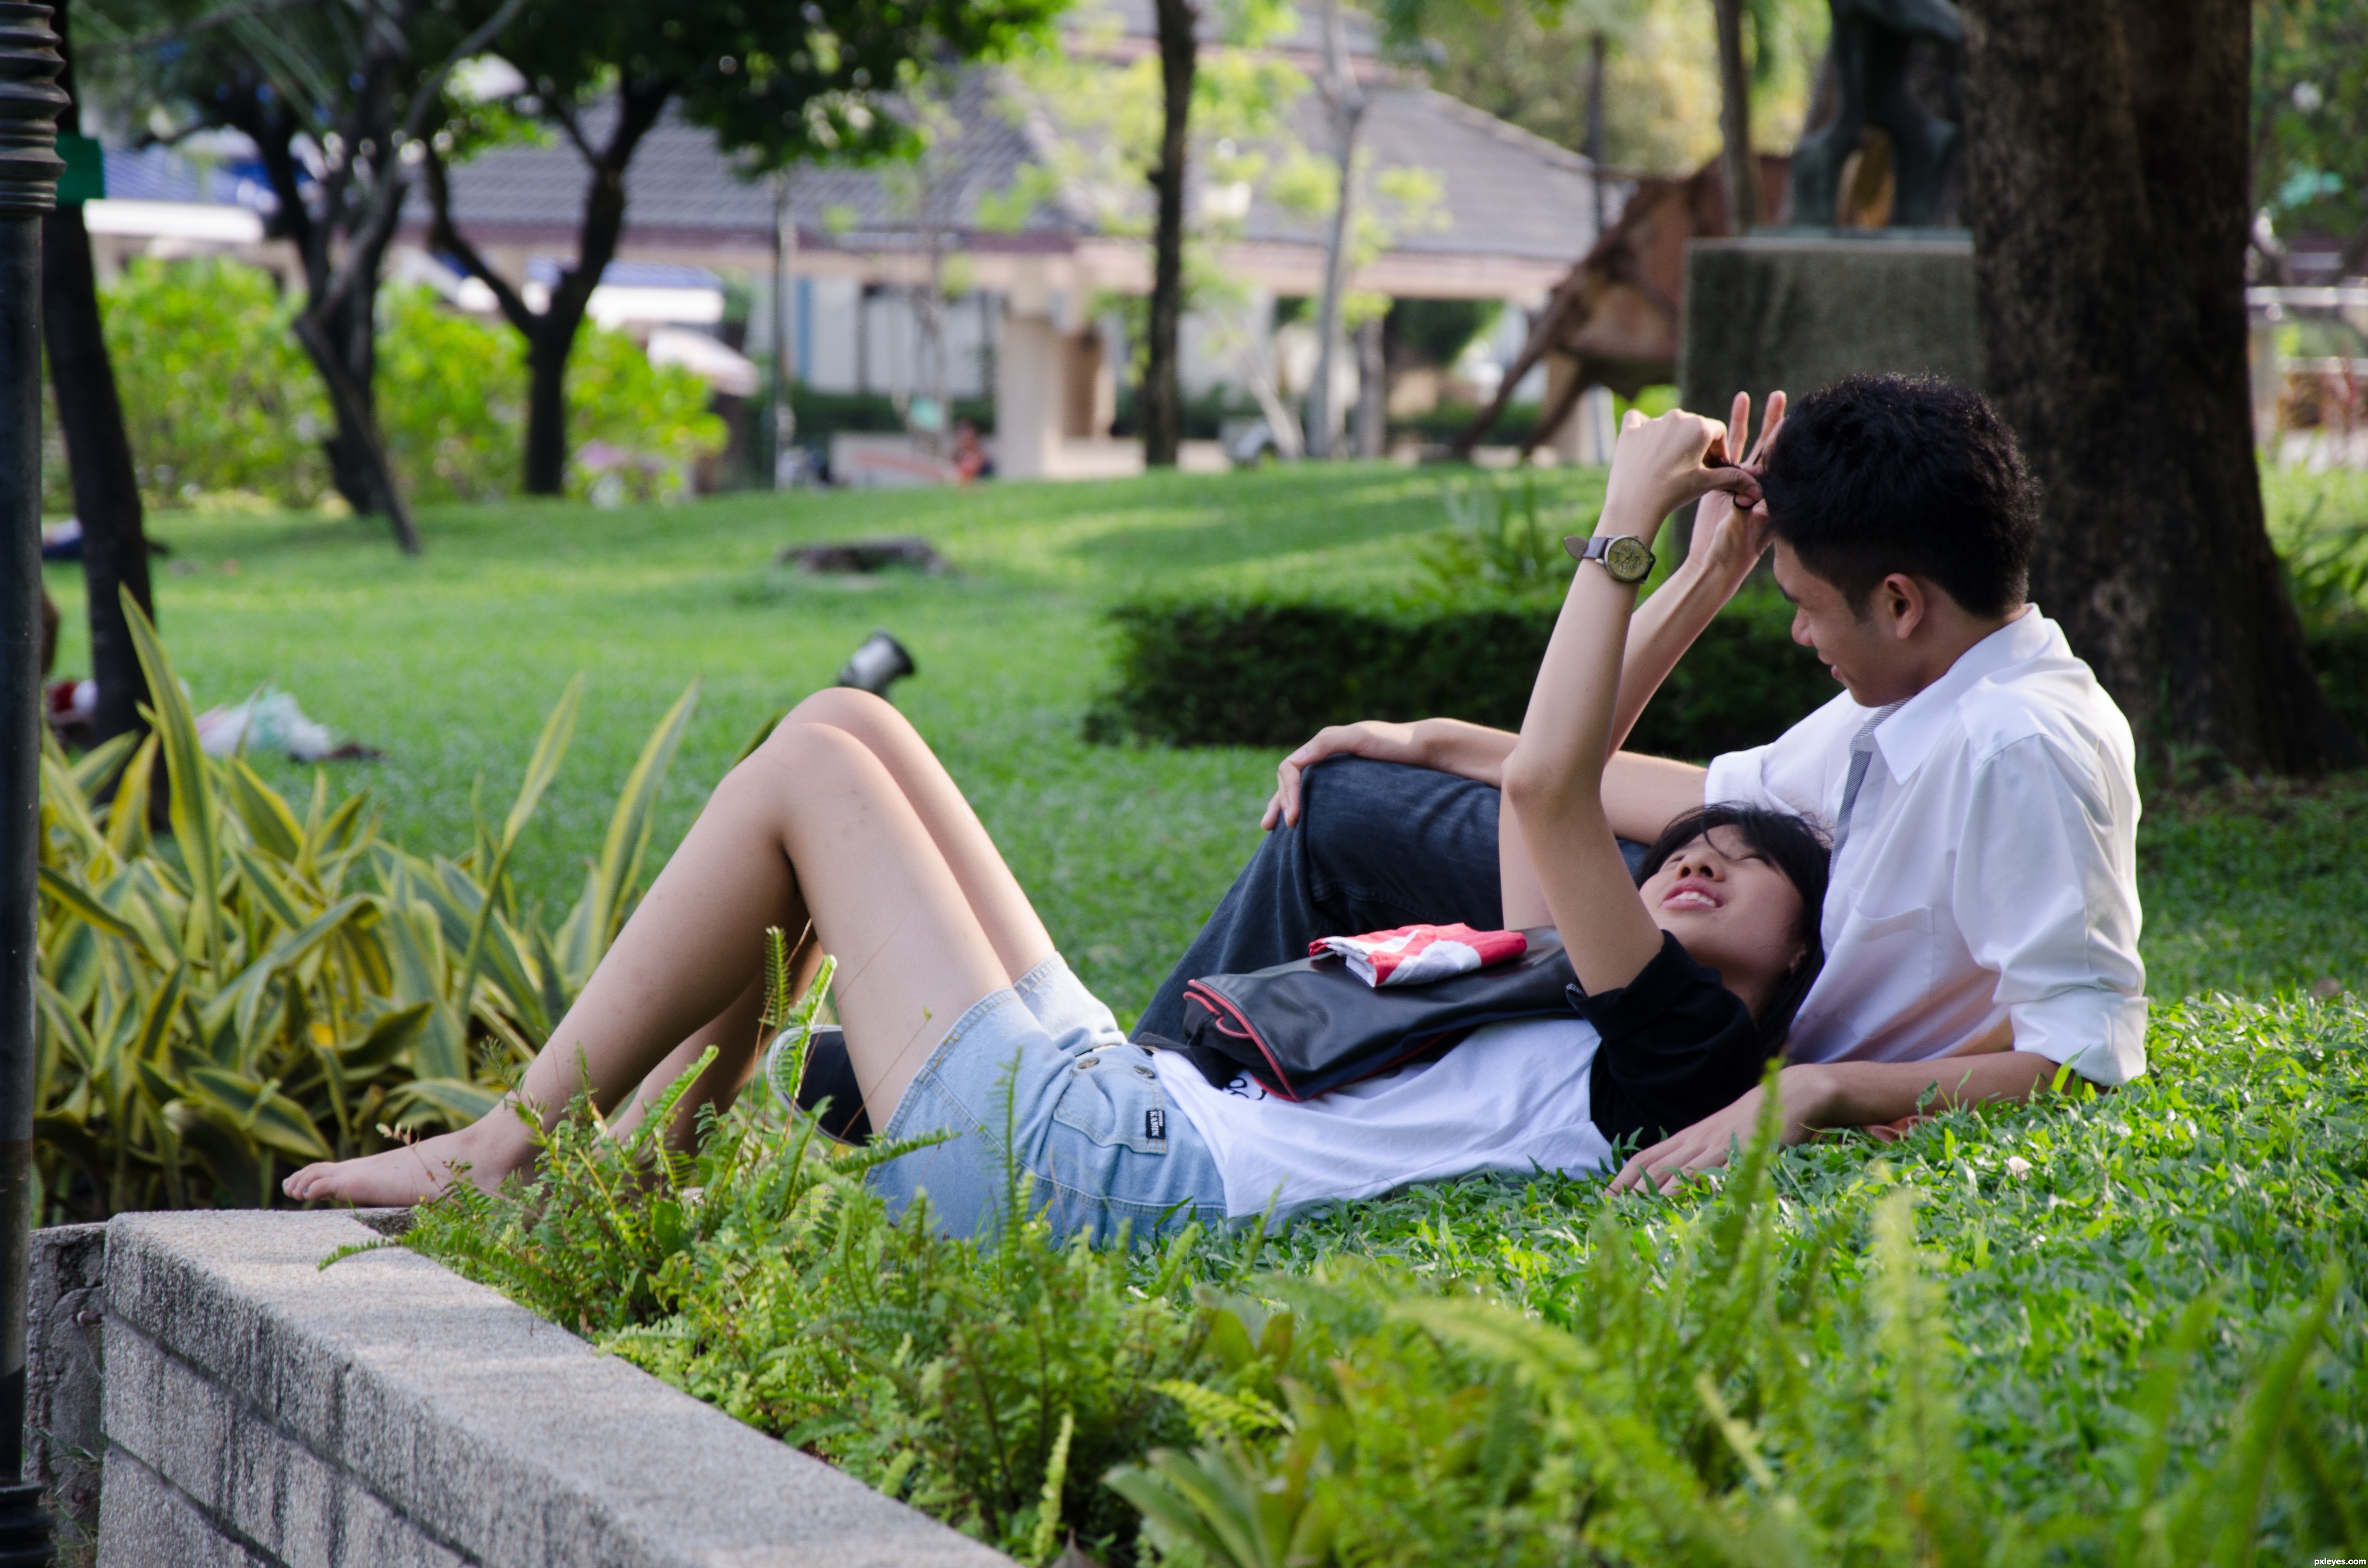 Couple at the park picture, by jelguoce for: two friends photography ...